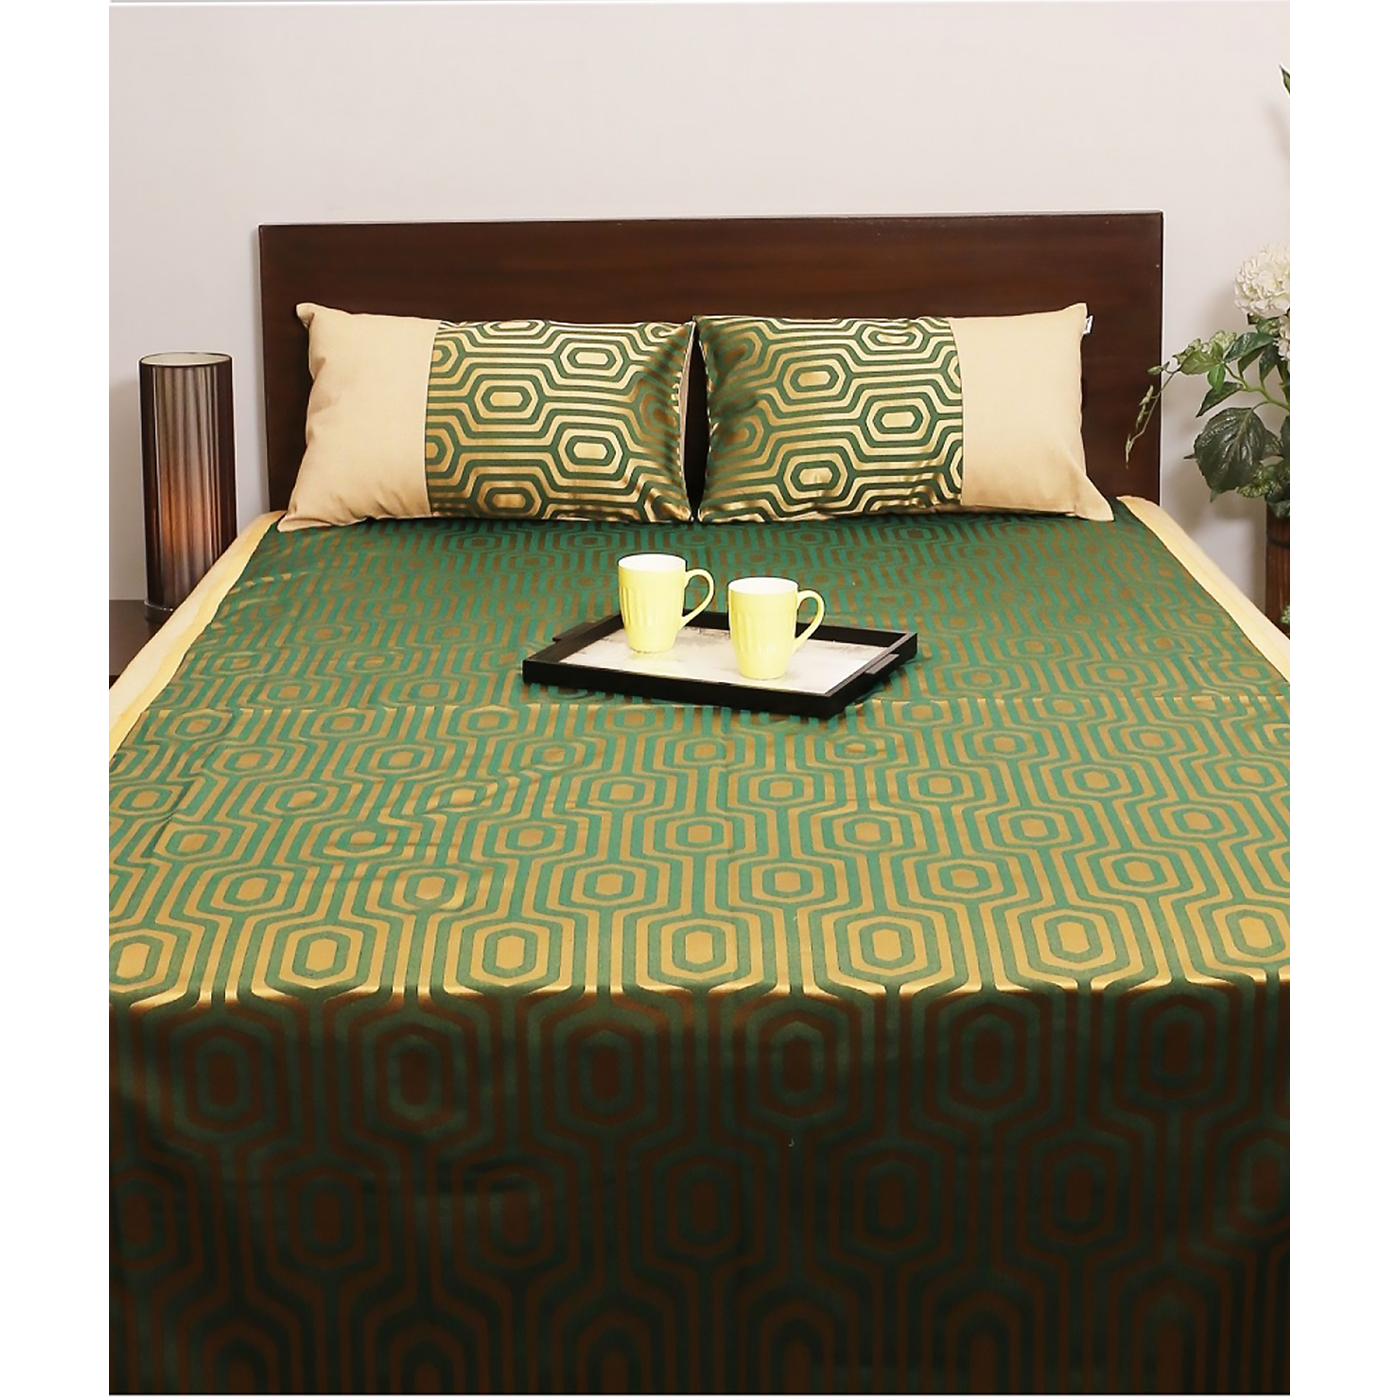 Elegant Hexa Jacquard Bed Cover Set with Matching Pillow Covers